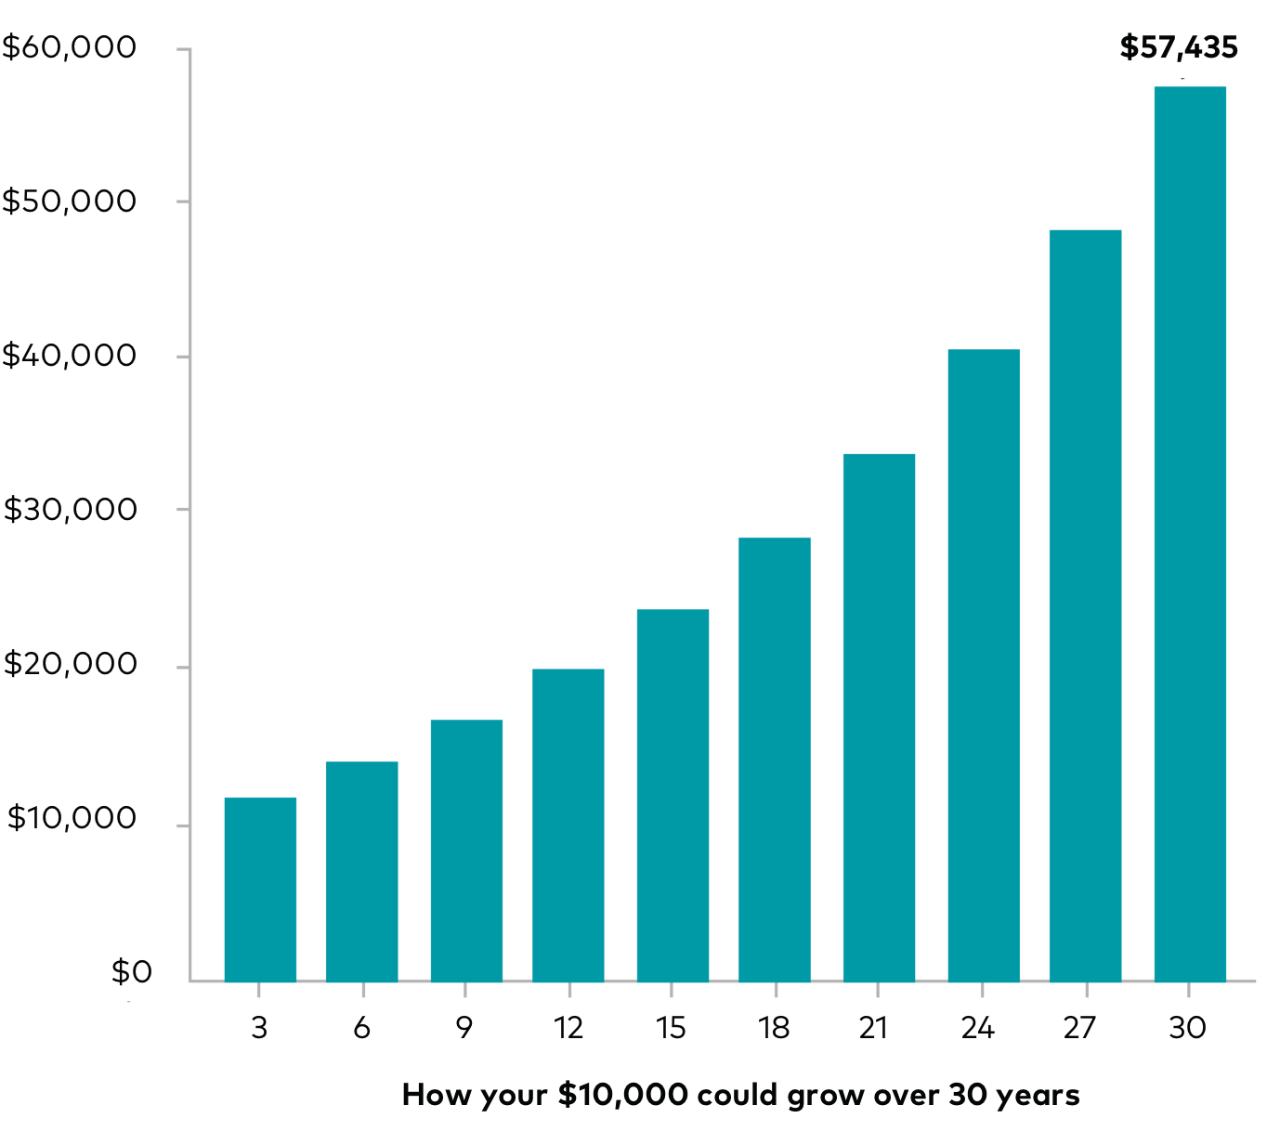 Chart showing how withdrawing $10,000 from your retirement account to pay for another goal, like college, could cost you more than $57,000 in growth over 30 years.